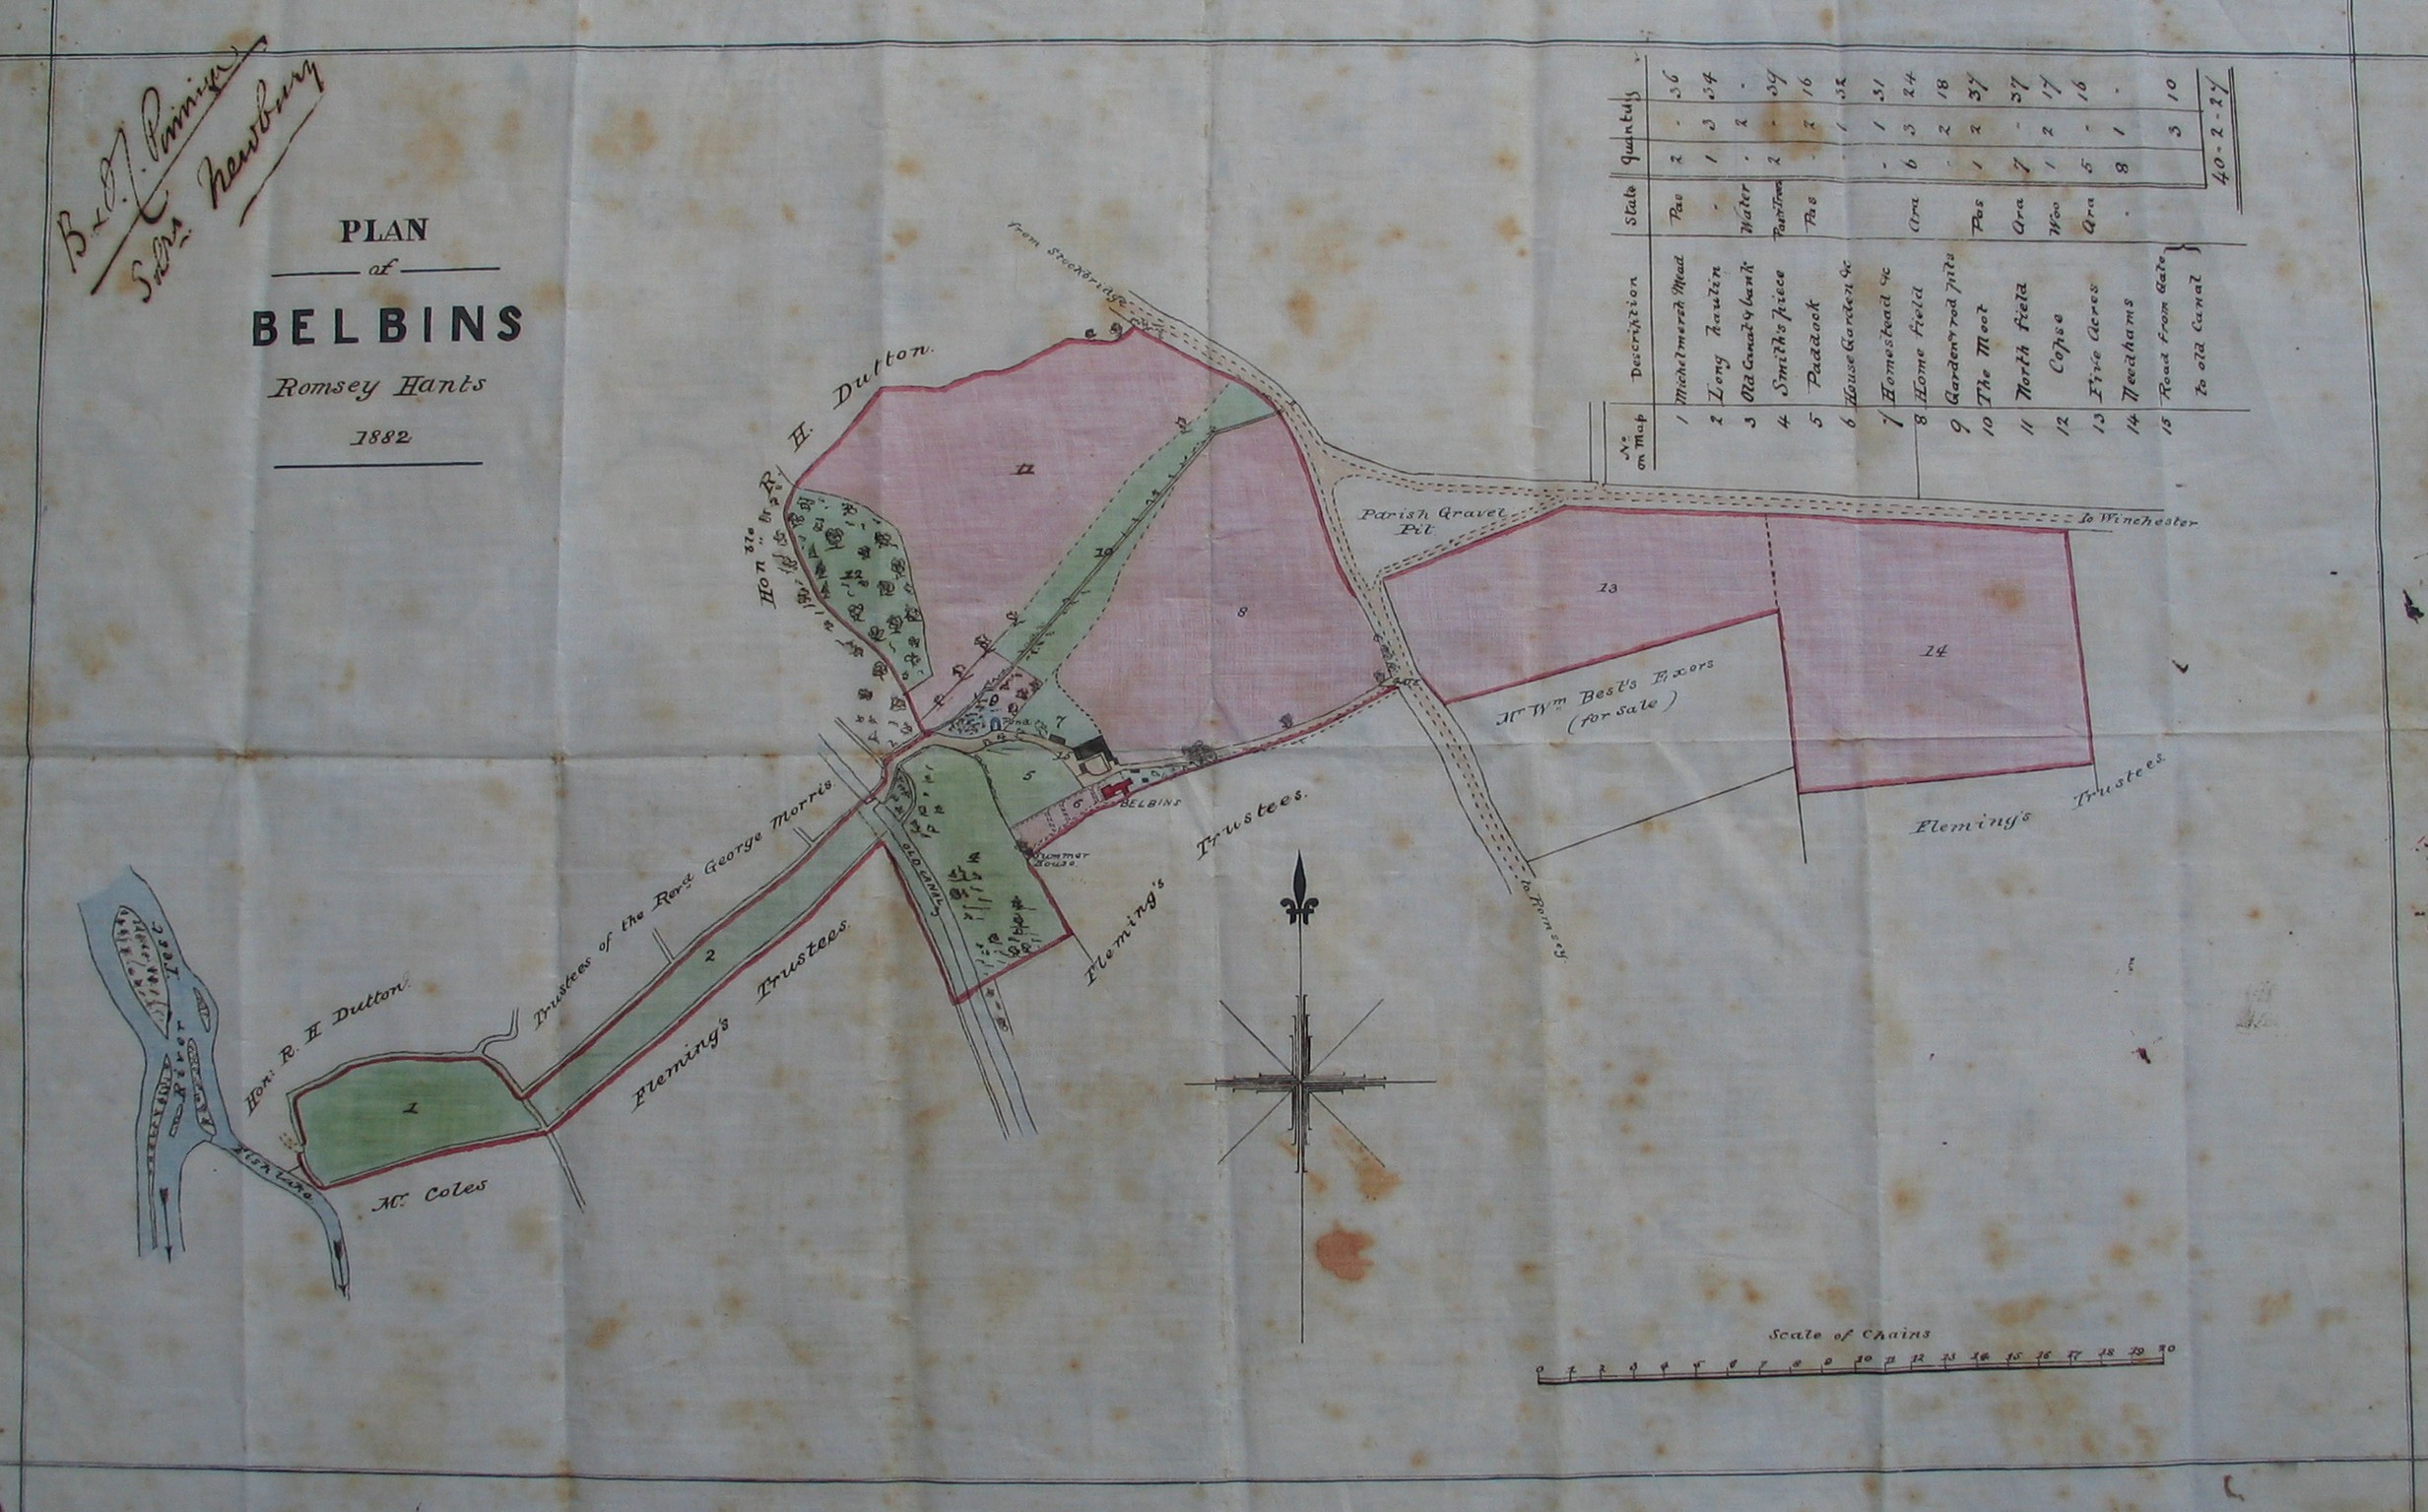 An 1882 map of BELBINS found at BELBINS HOUSE